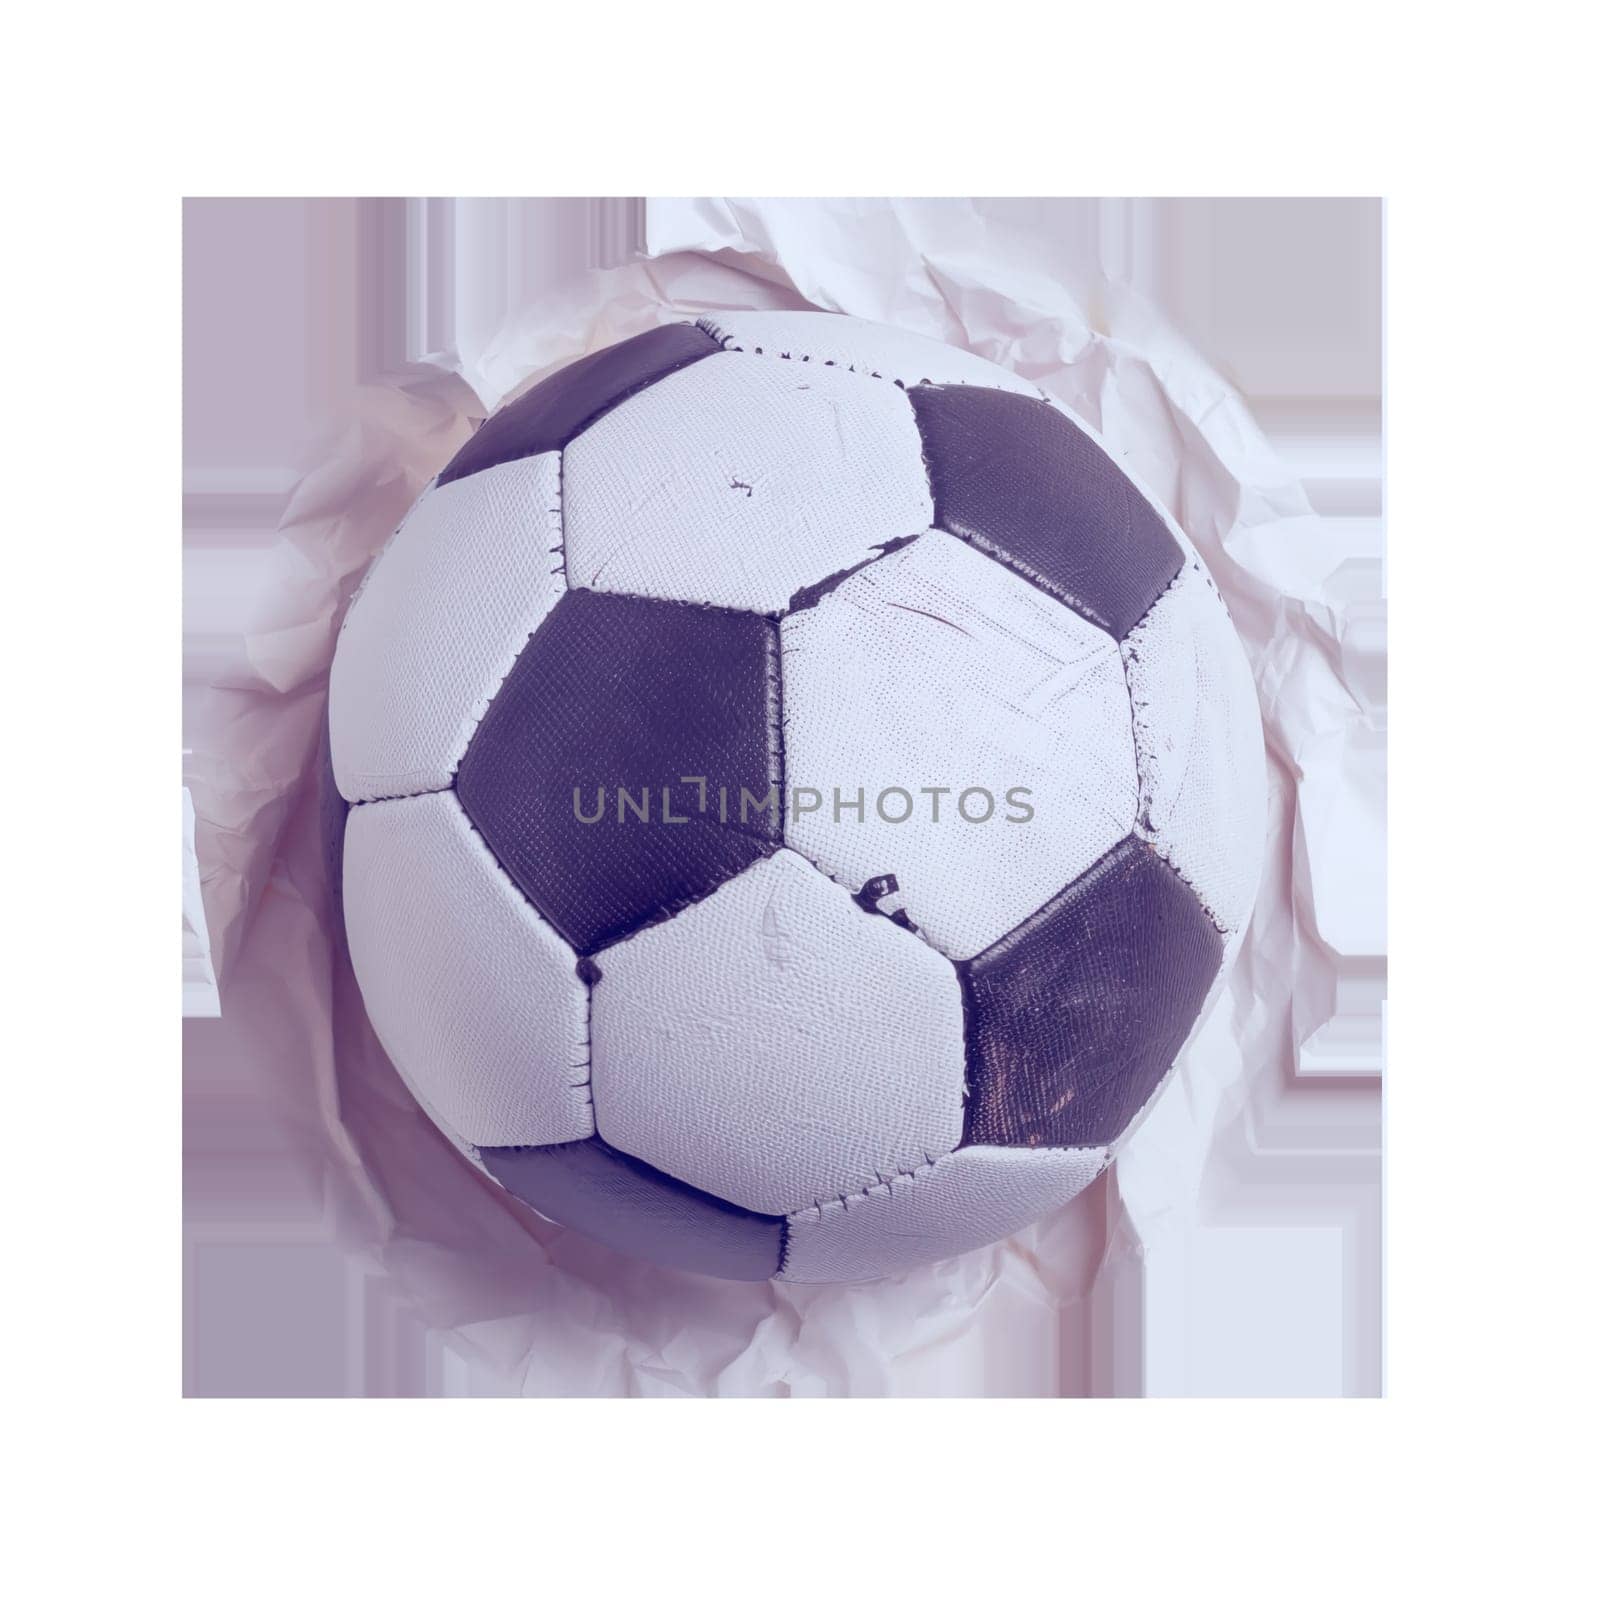 Soccer ball on crumpled paper cut out image by Dustick